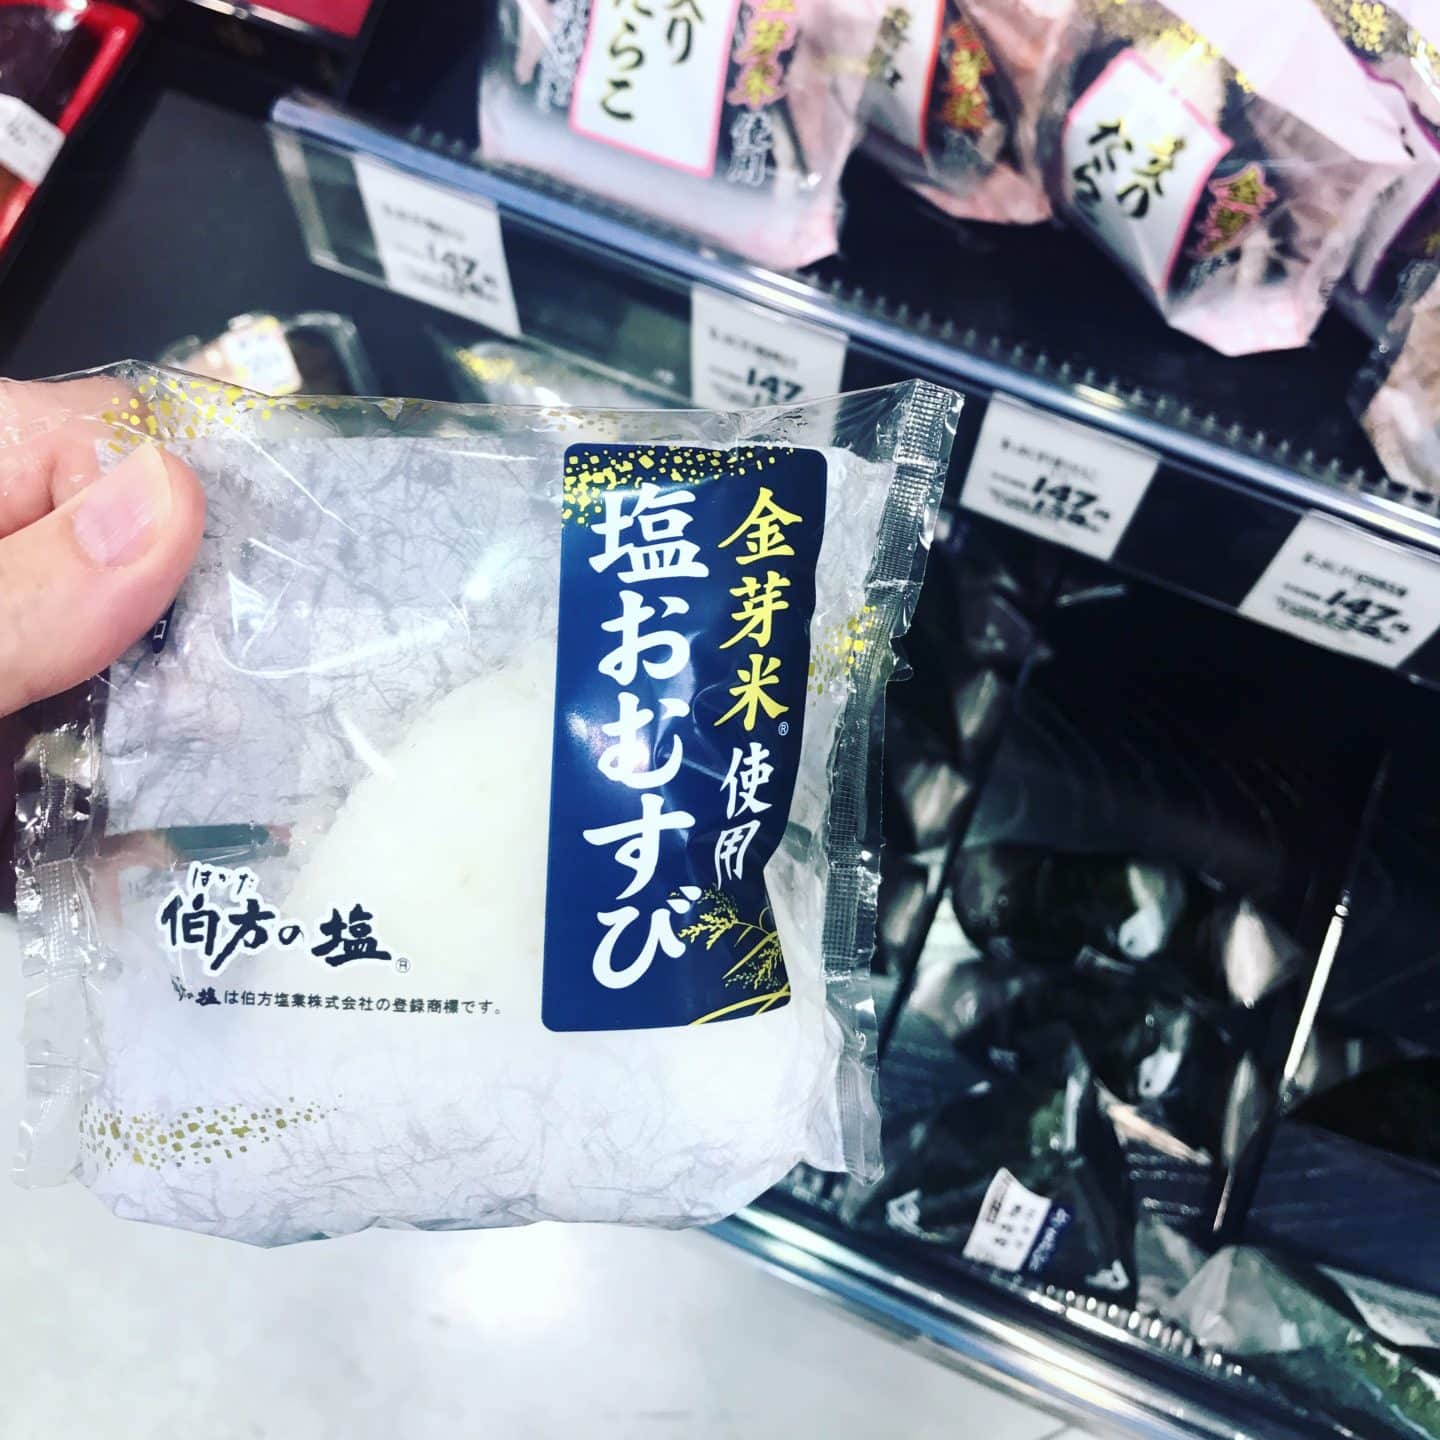 A plain salted rice rice ball in a convenience store in Japan